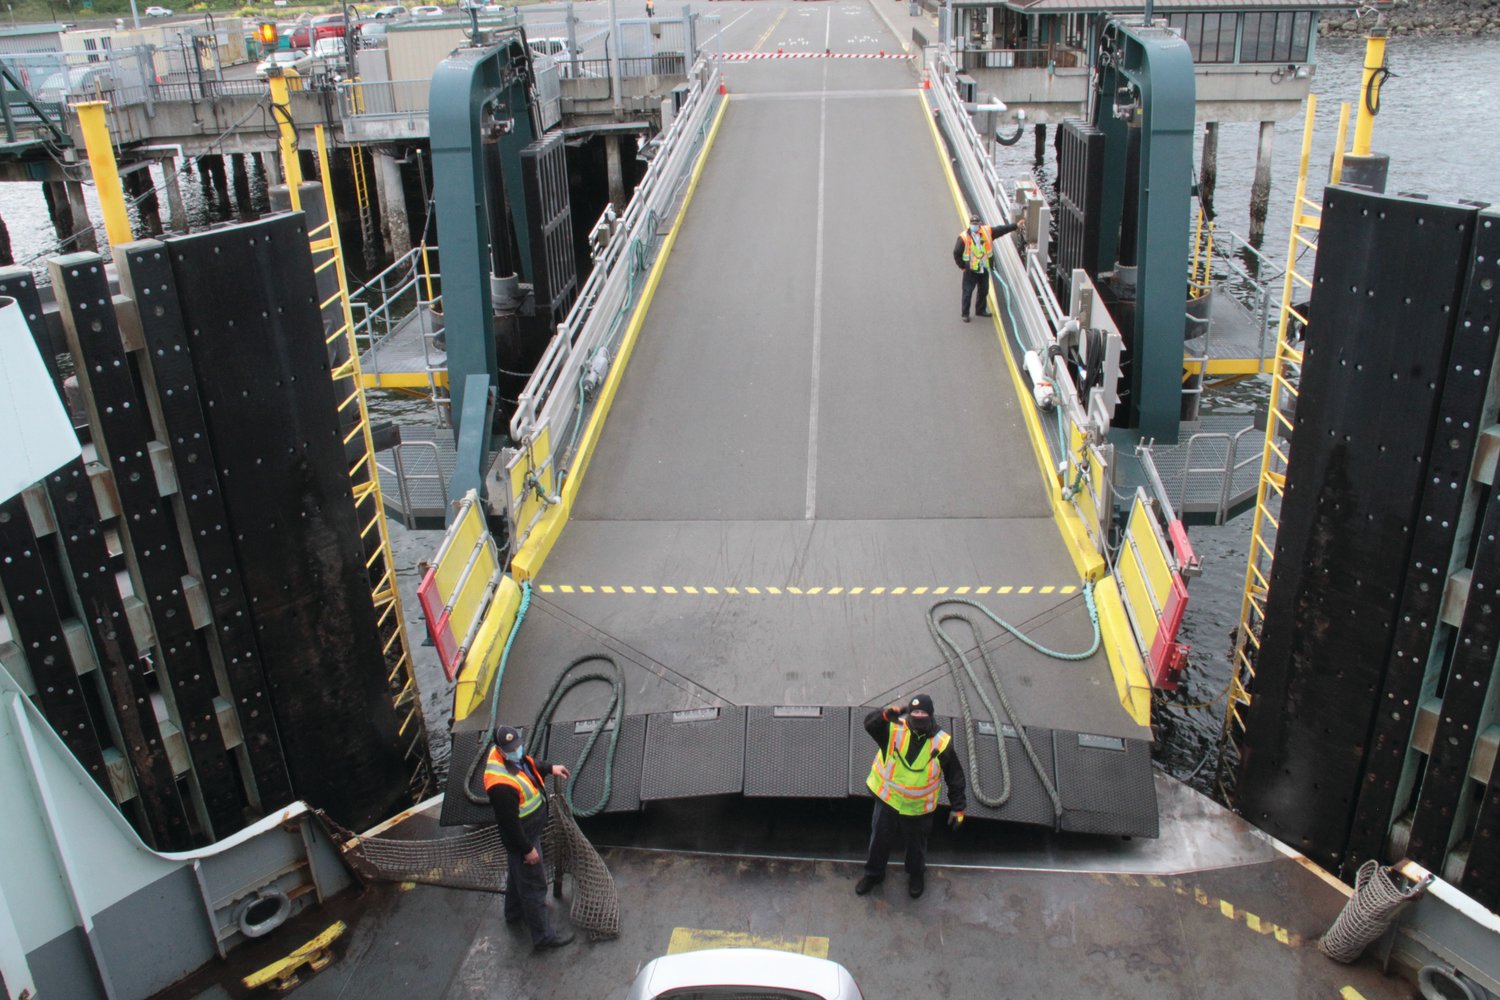 WSF workers lower the ramp at the Port Townsend Ferry Terminal after the arrival of the ferry M/V Kennewick.